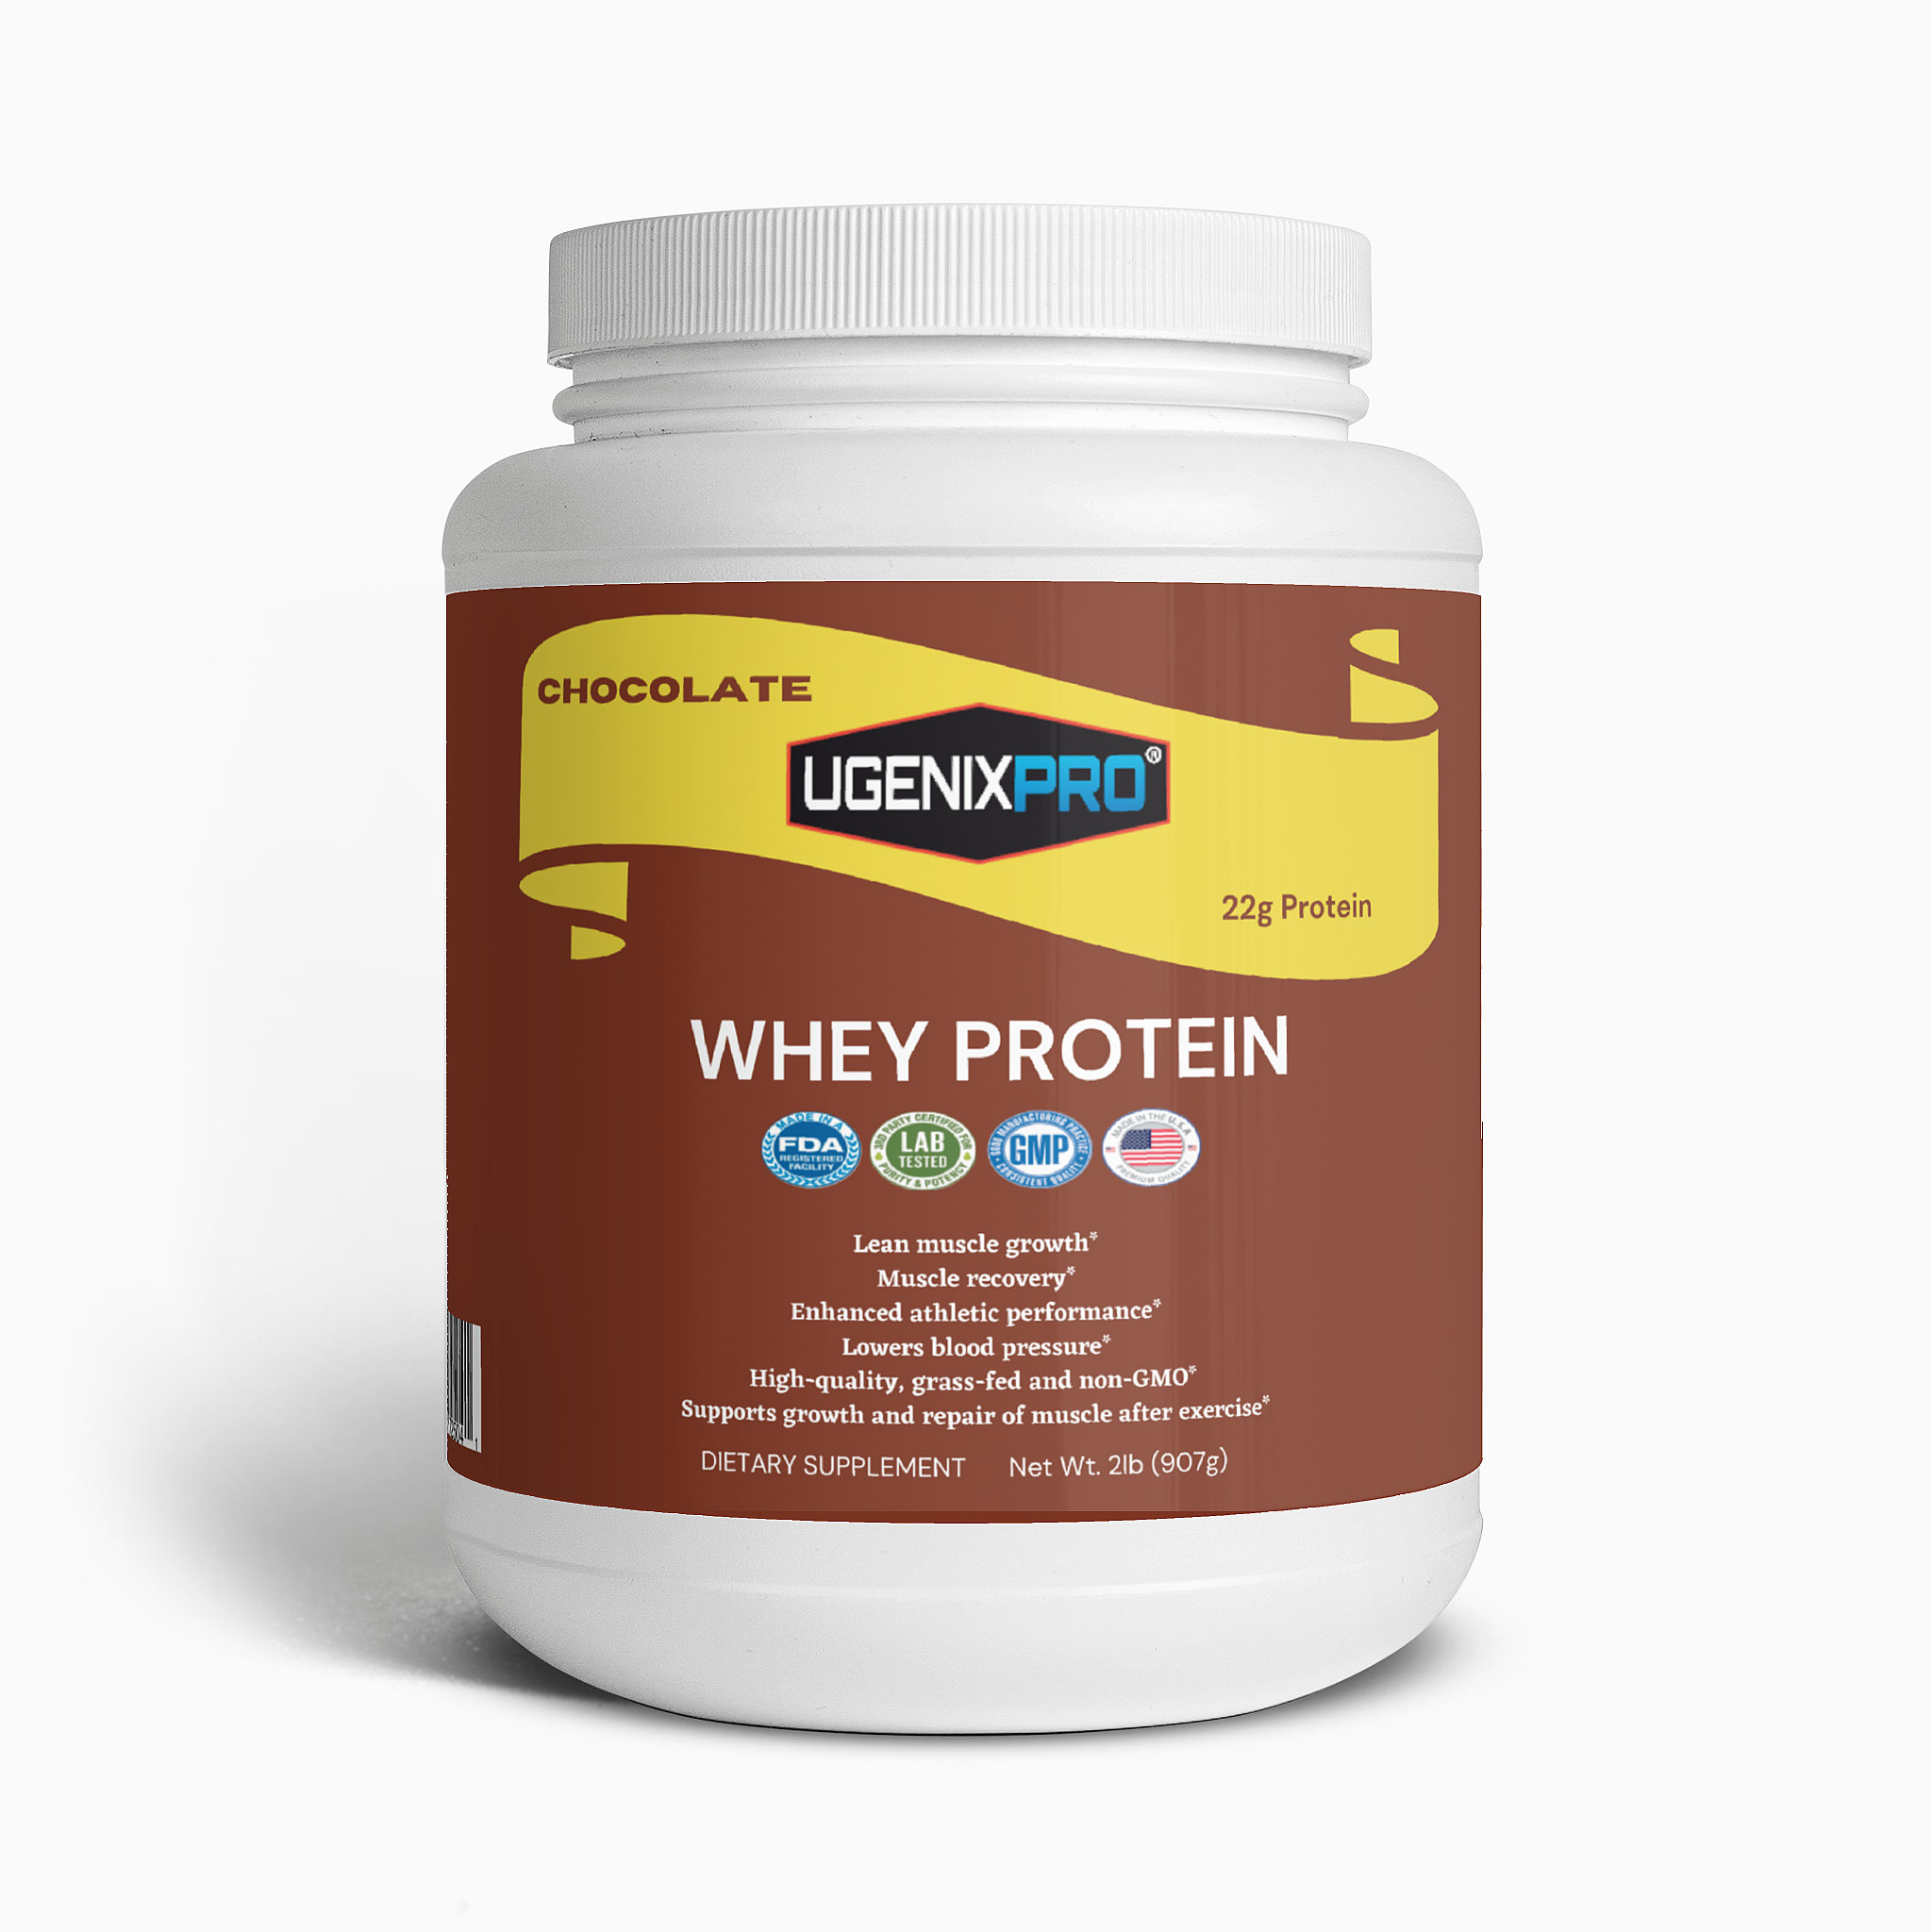 UgenixPRO® Whey Protein (Chocolate) 22g Protein | Grass Fed | Non-GMO | Supports Lean Muscle Growth